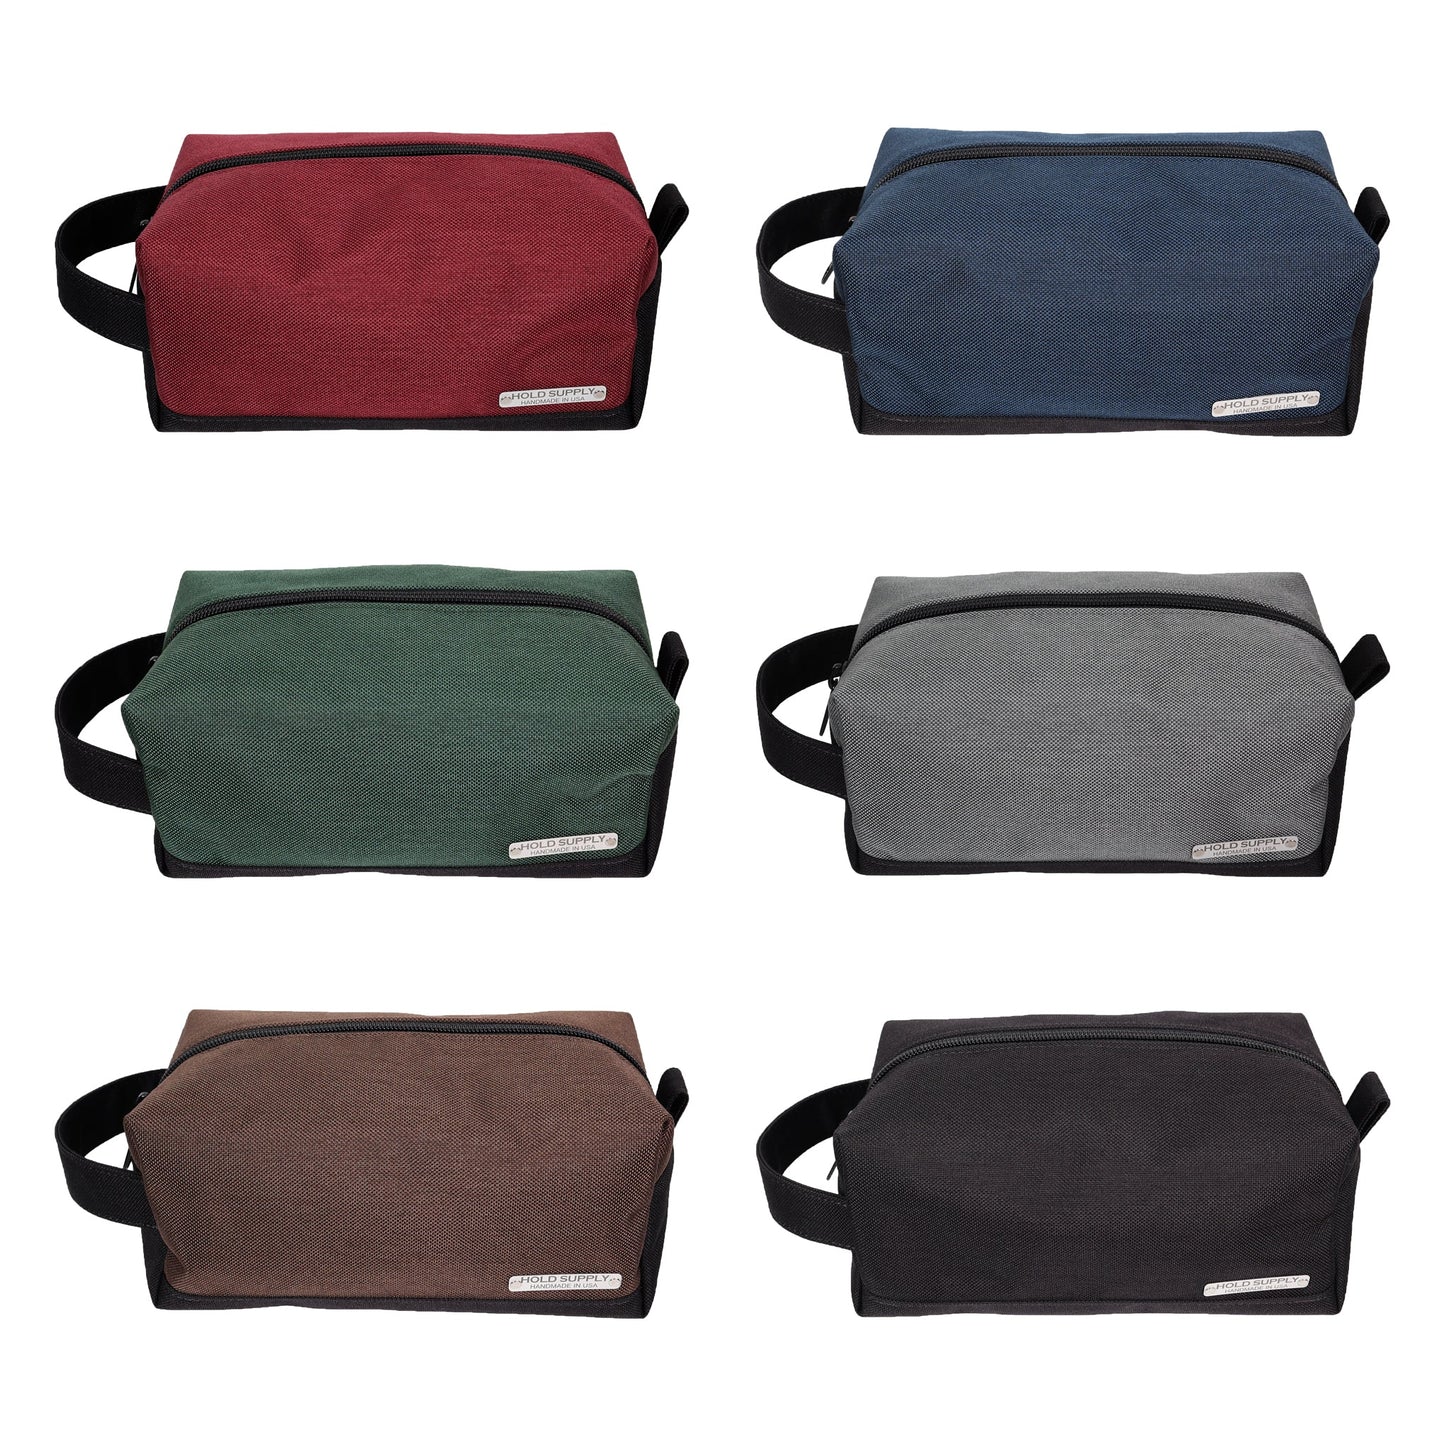 Brown and Black Canvas Toiletry Bag